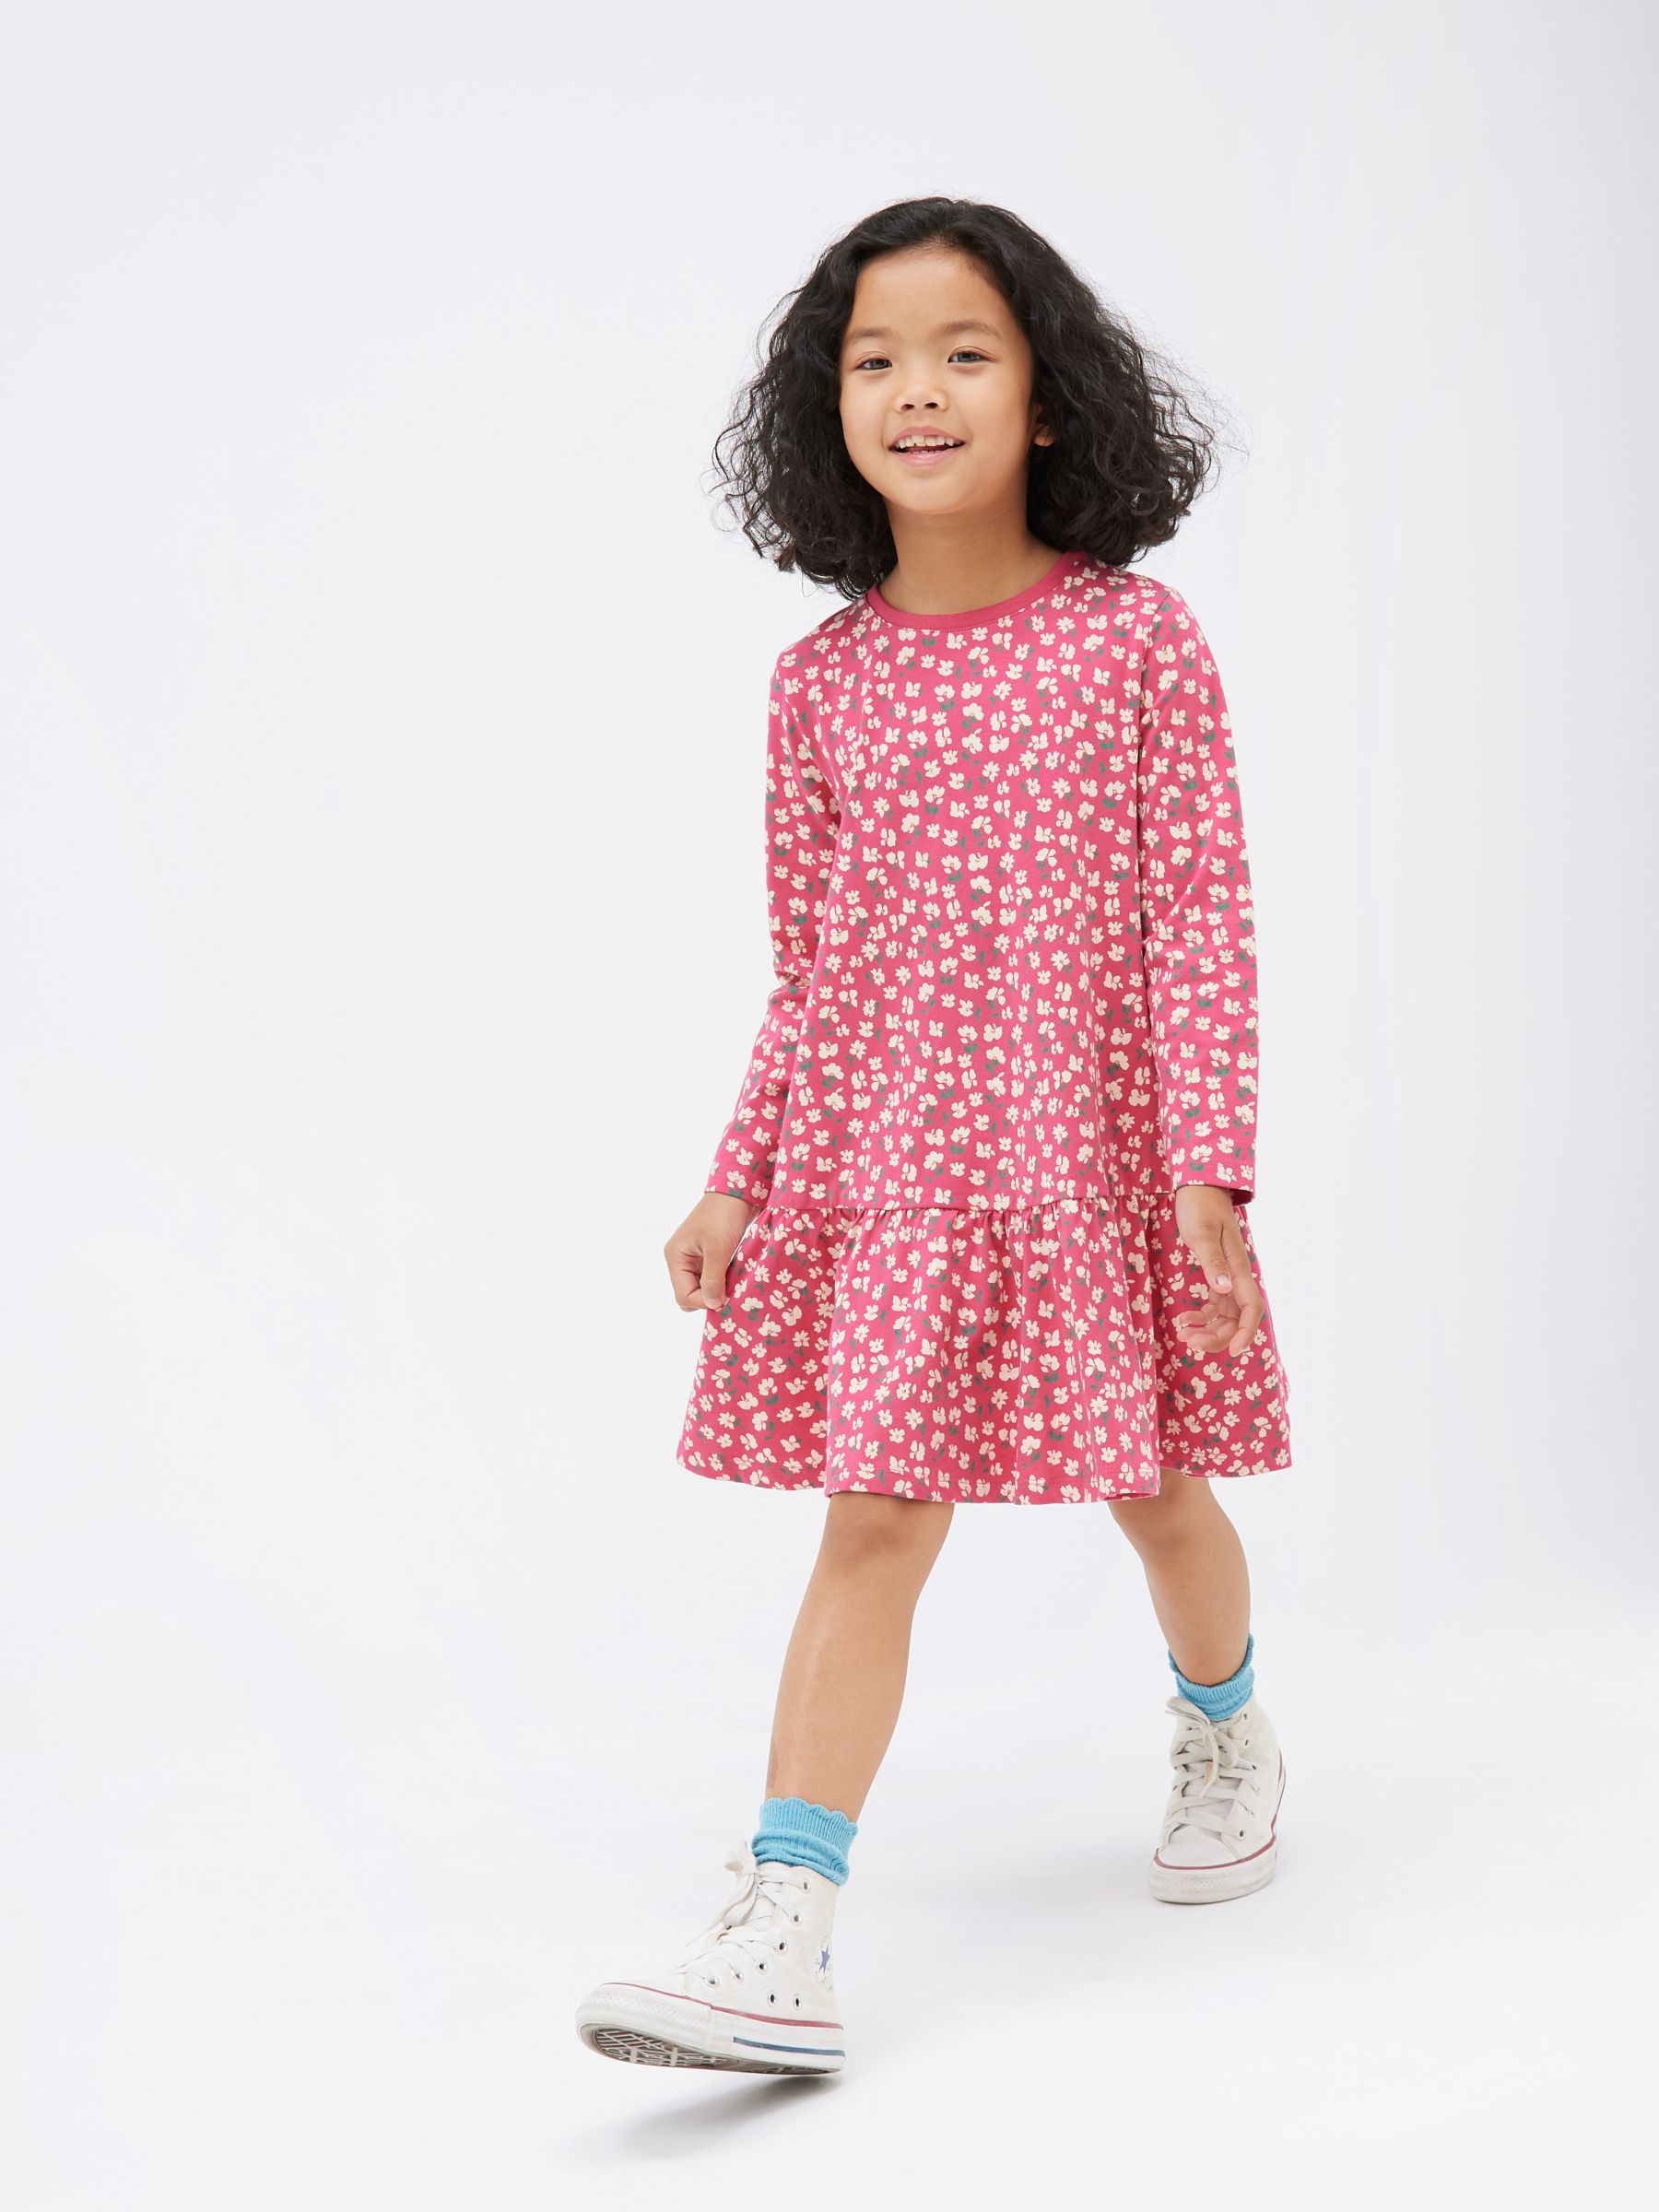 New Girls Dotted Party Dress in Pink Orange  8-9 9-10 10-11 Years 